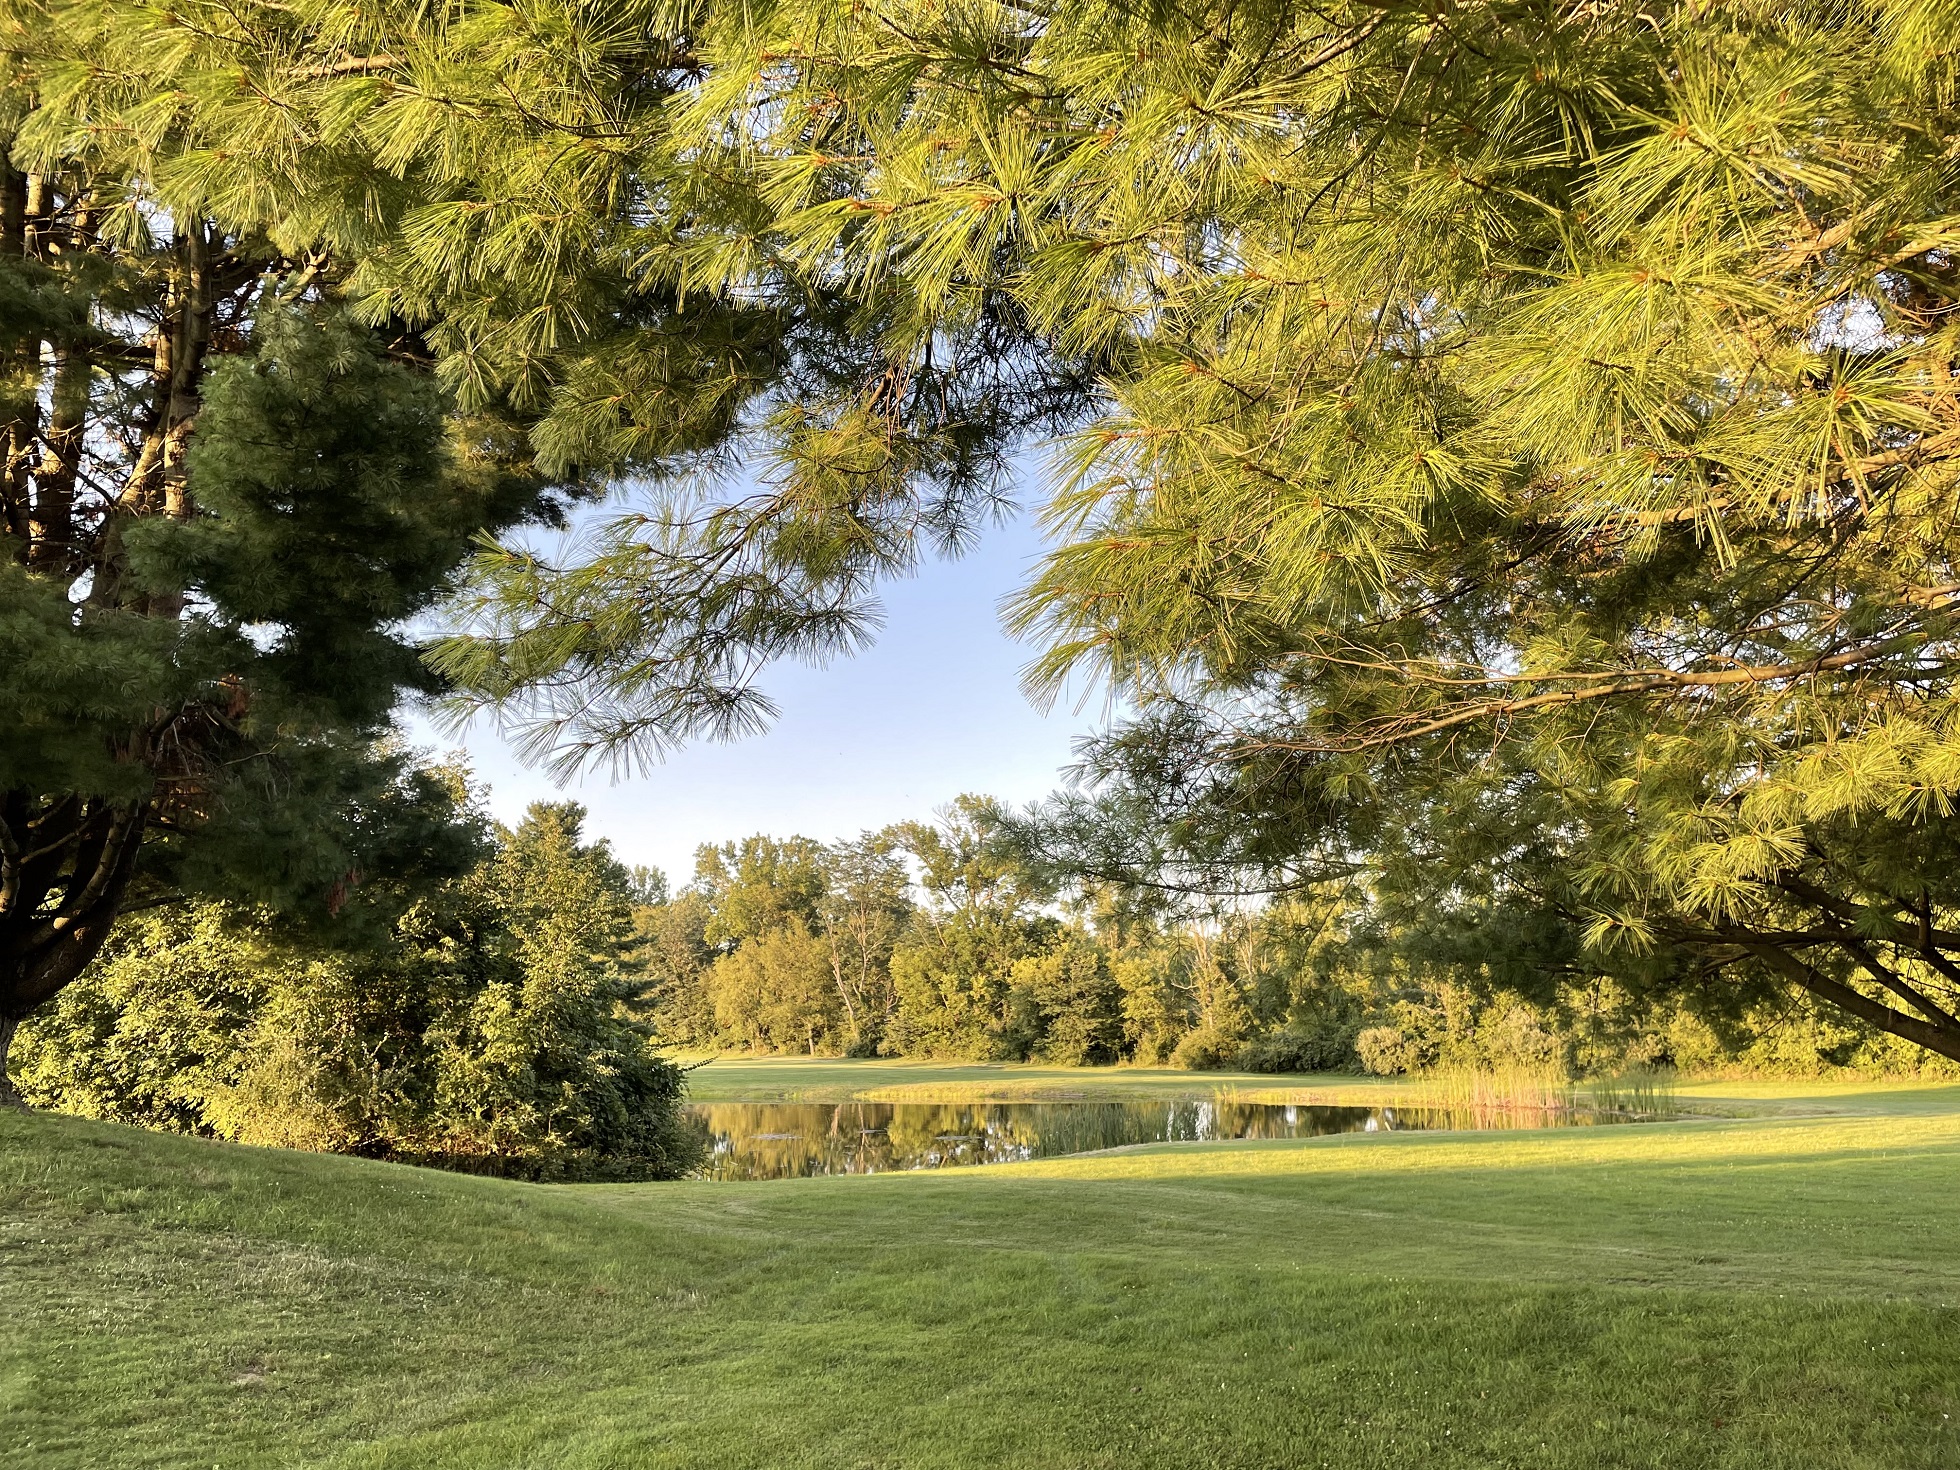 view of golf course with large tree in foreground